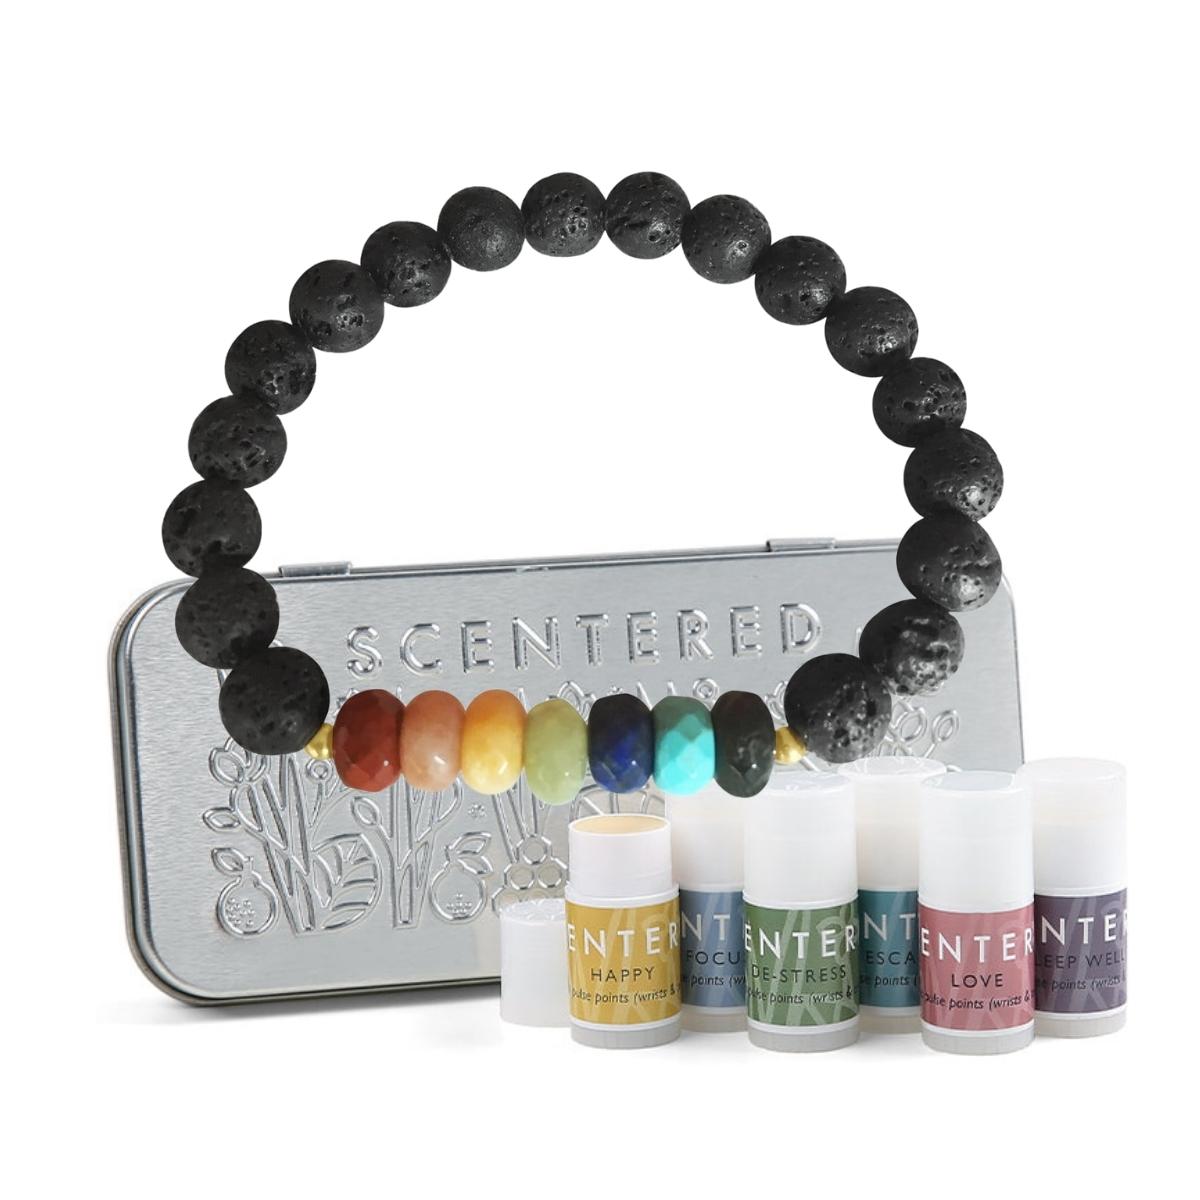 Lava Stone Chakra Bracelet with Healing Gemstones to Release Emotional Baggage. Best gemstones for chakra healing. Now available with Mindful Aromatherapy Mini Balms. Ready, set, relax with the perfect wellbeing ritual.